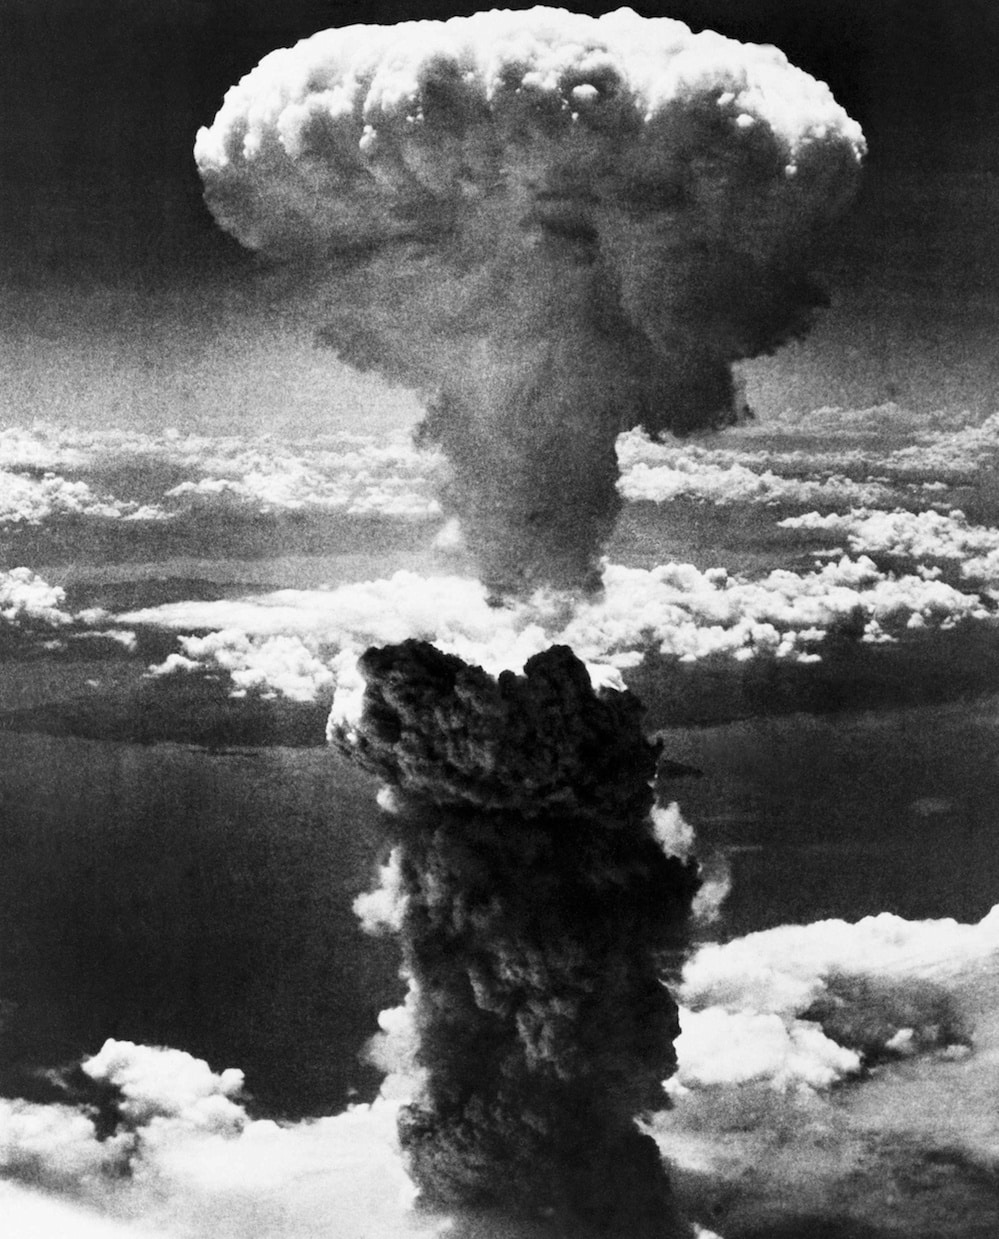 878727_ap-was-there-atomic-bomb-1